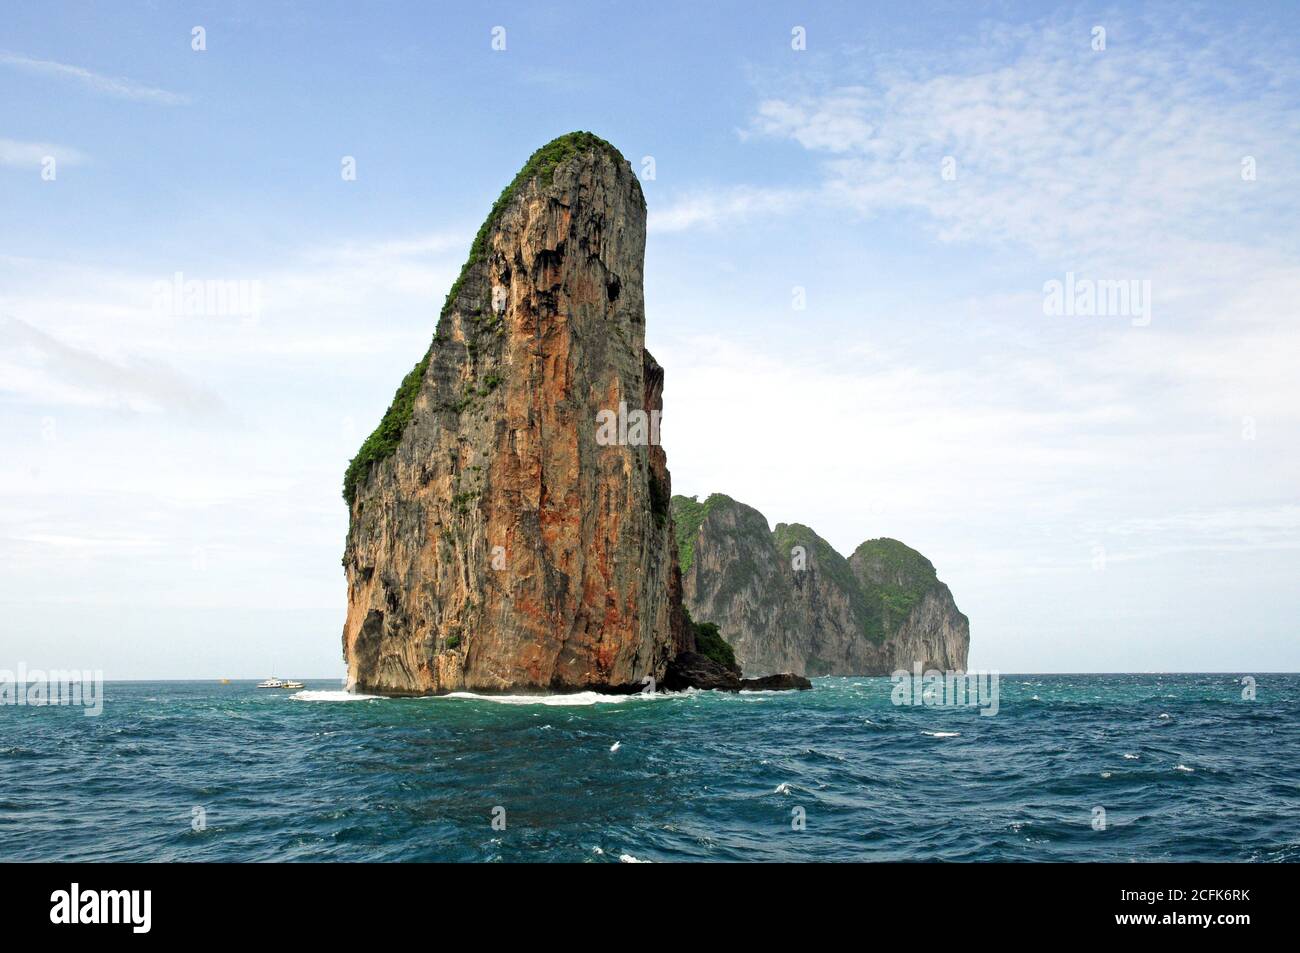 The cliffs of Ko Phi Phi Lee rising up from the Andaman Sea. Stock Photo